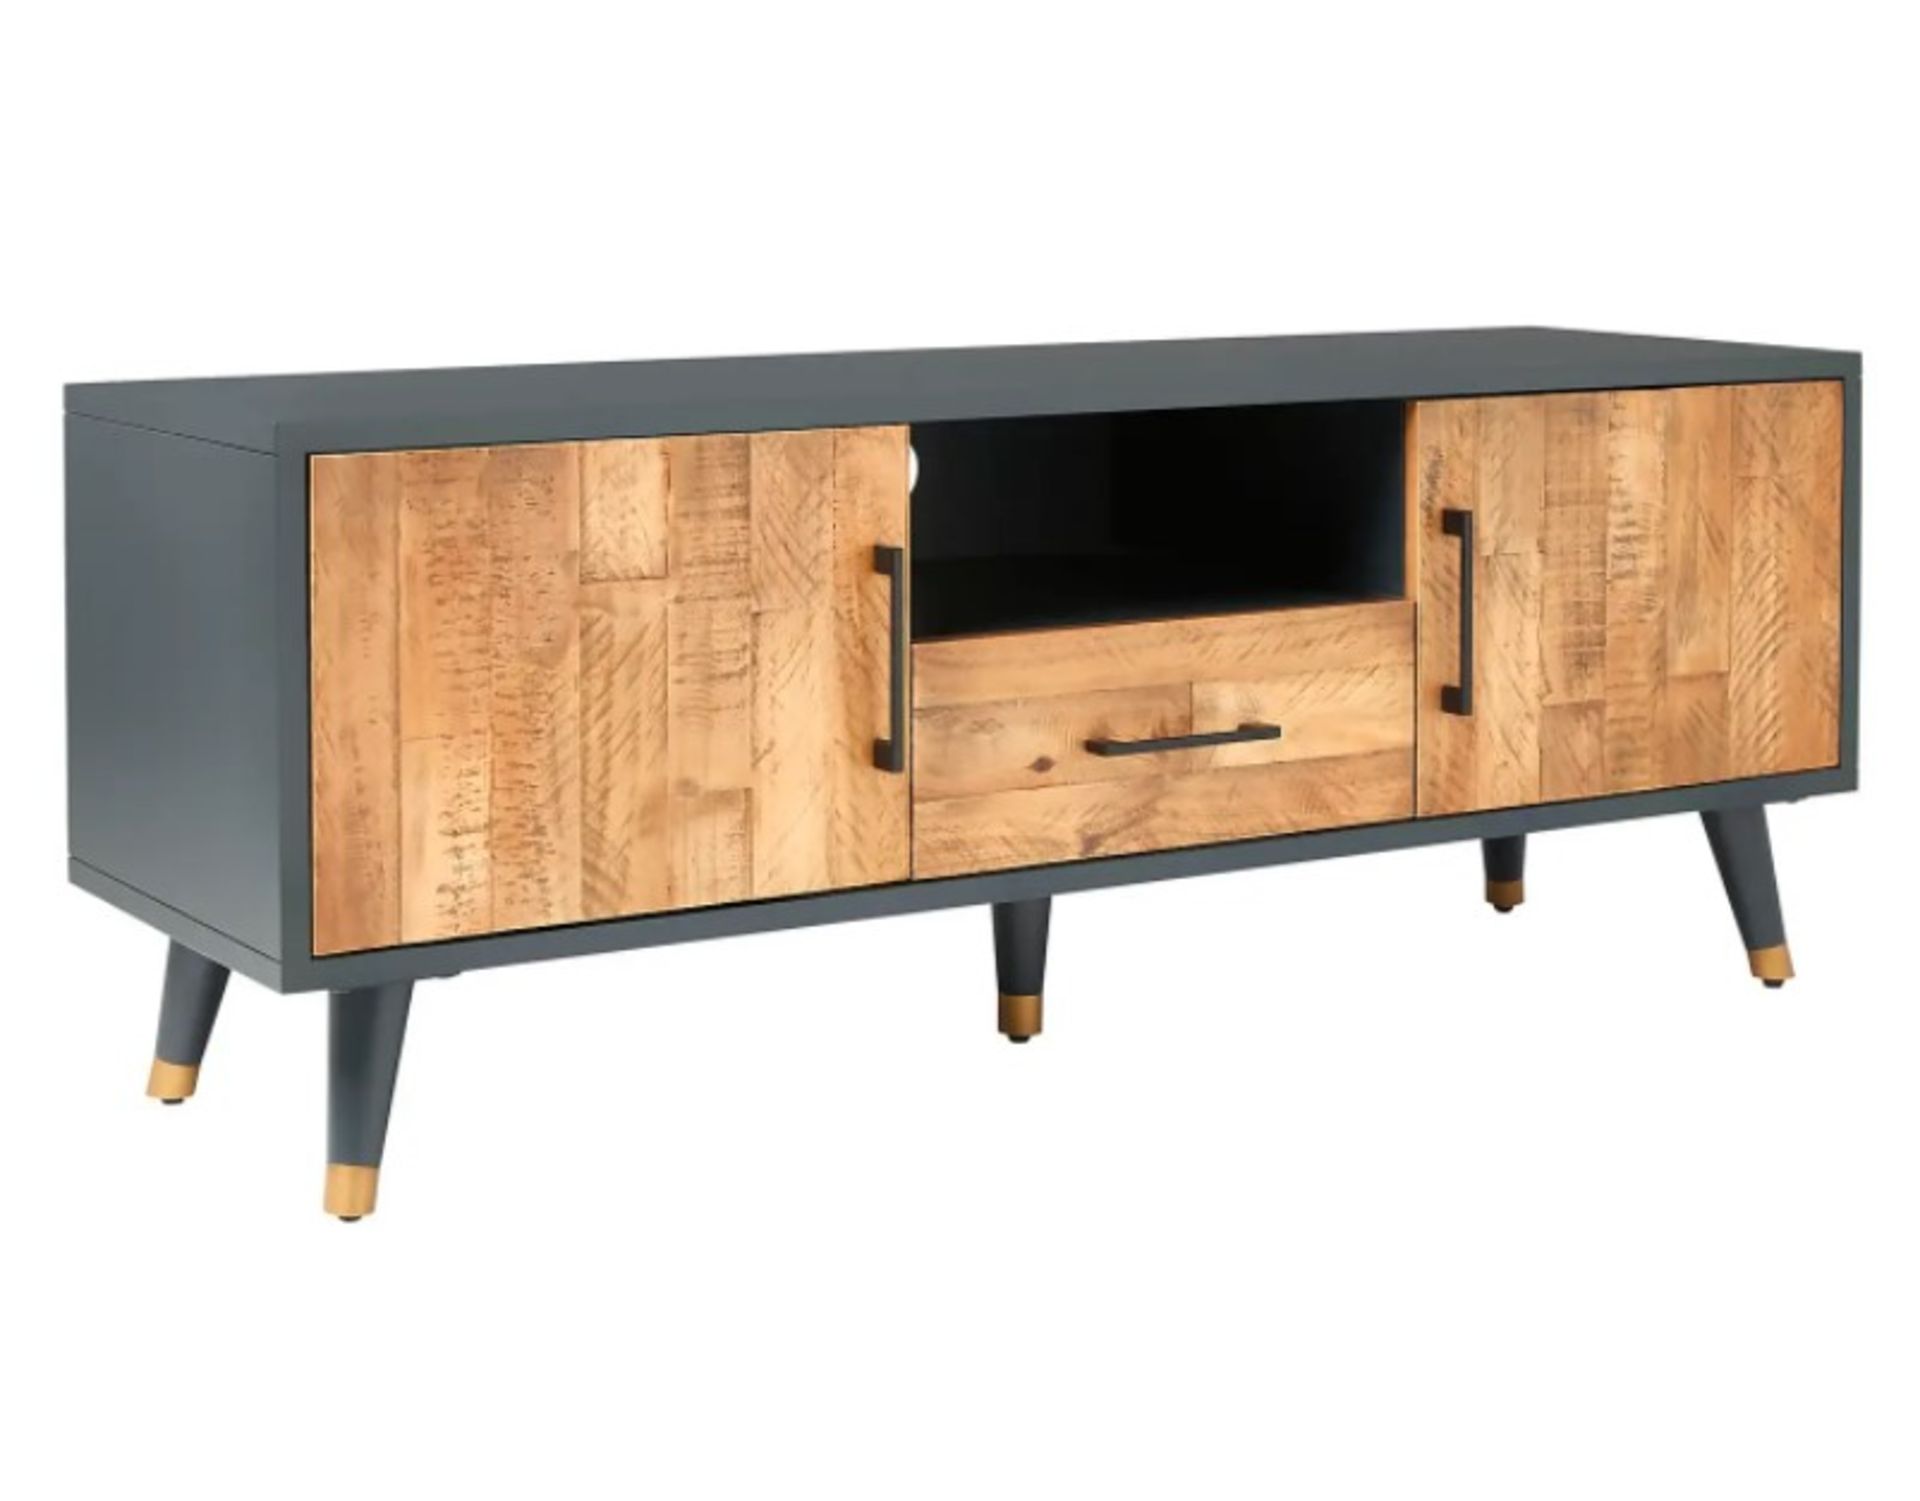 (Mz) 1x Franklin Wide TV Stand RRP £325. (H)50 x (W)134 x (D)40cm - Image 2 of 4